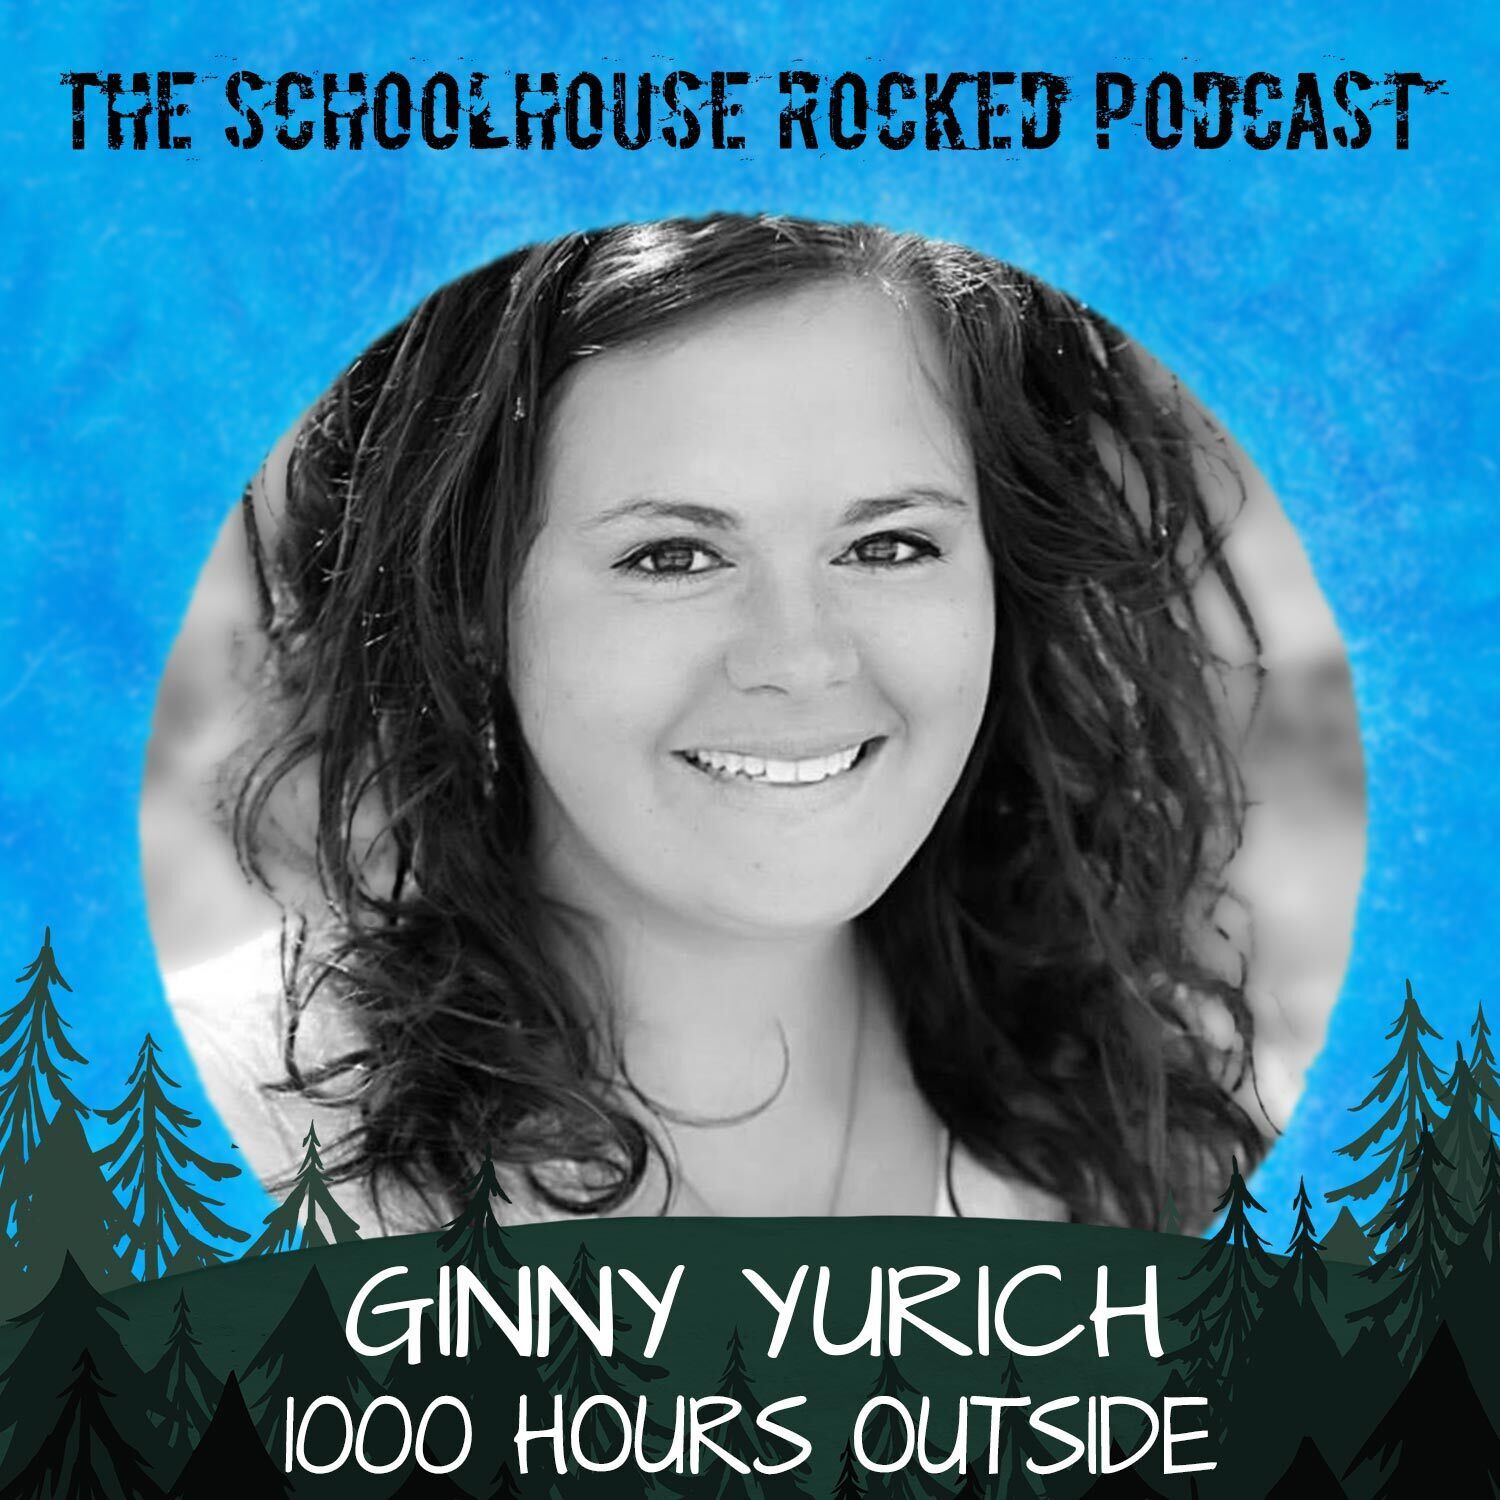 Interview with Ginny Yurich - 1000 Hours Outside